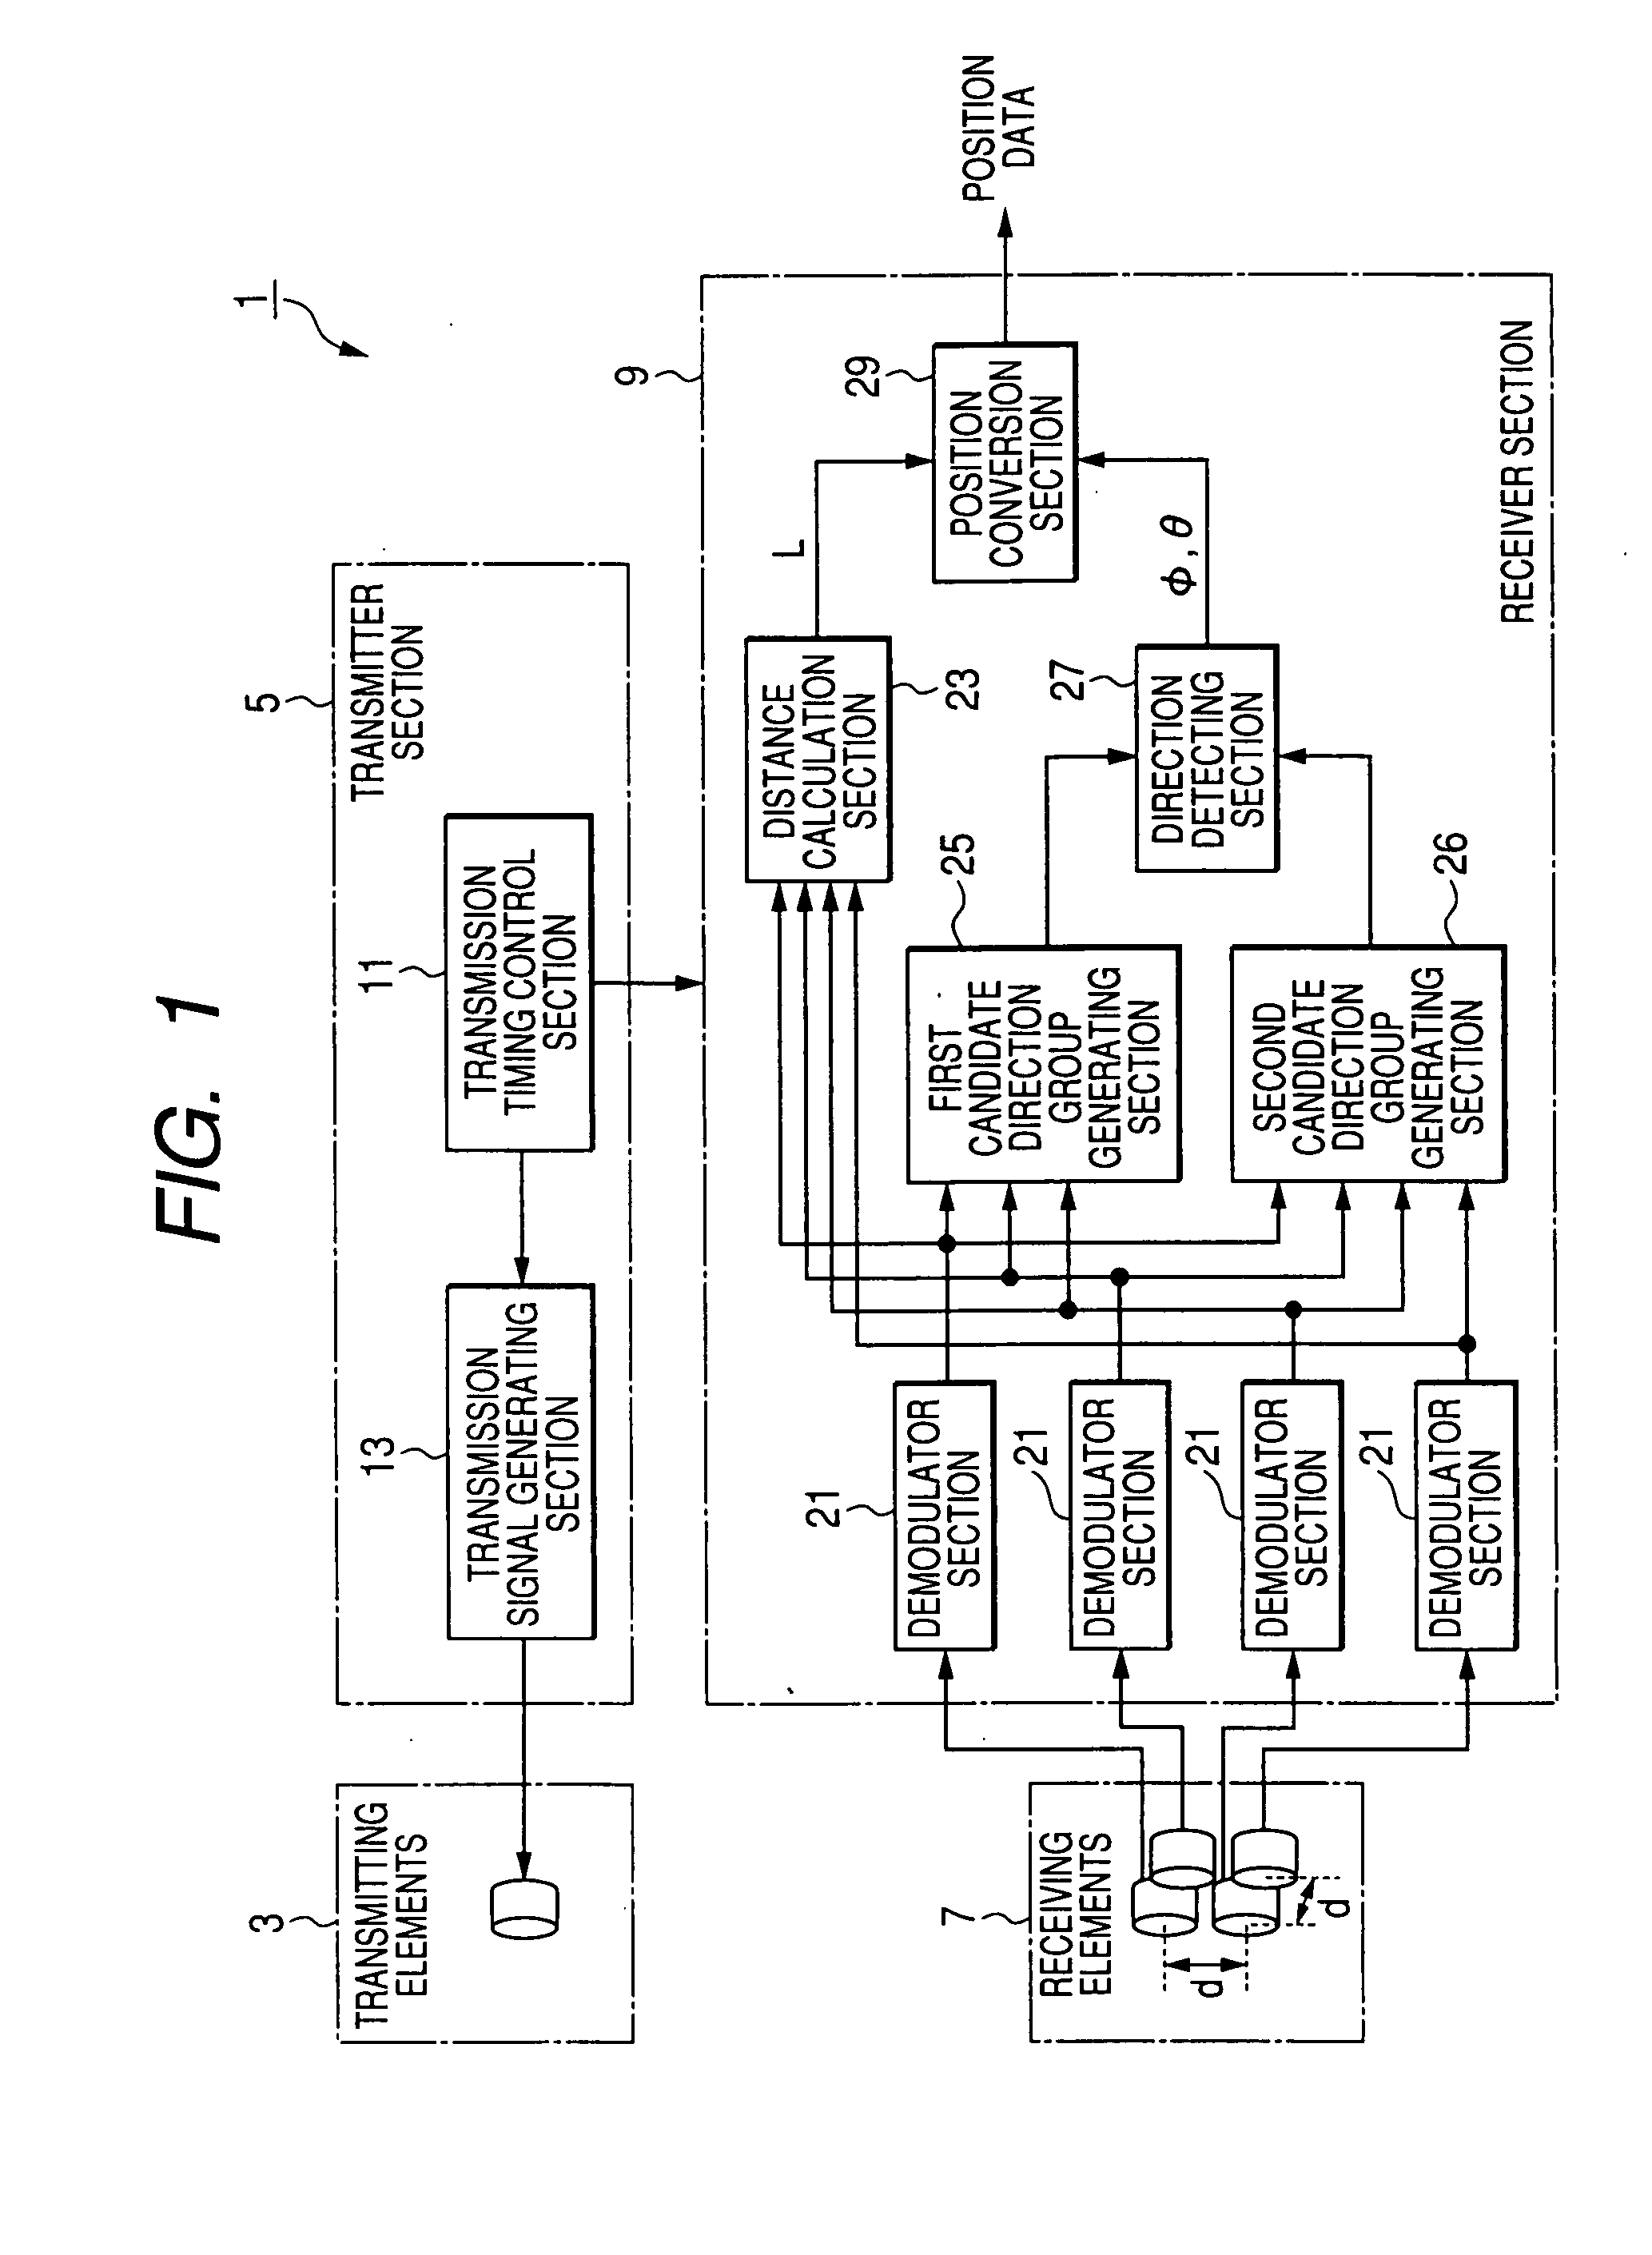 Object direction detection method and apparatus for determining target object direction based on rectified wave phase information obtained from plurality of pairs of receiver elements